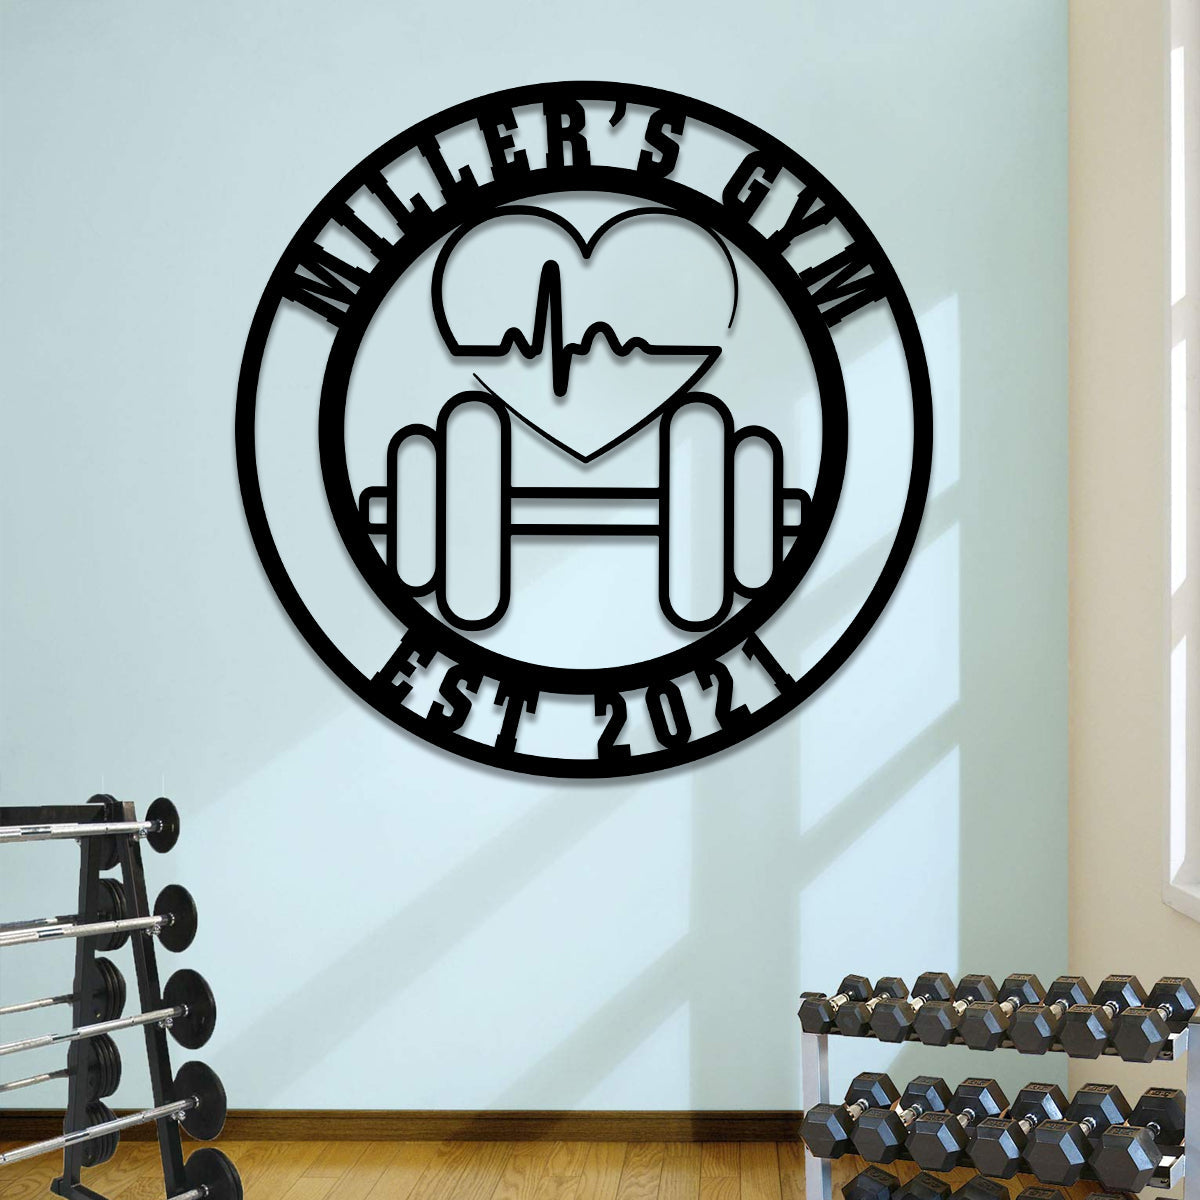 Personalized Metal Gym Sign, Fitness Center, Club, Home Decor, Wedding, Anniversary Art Gift For Him/her